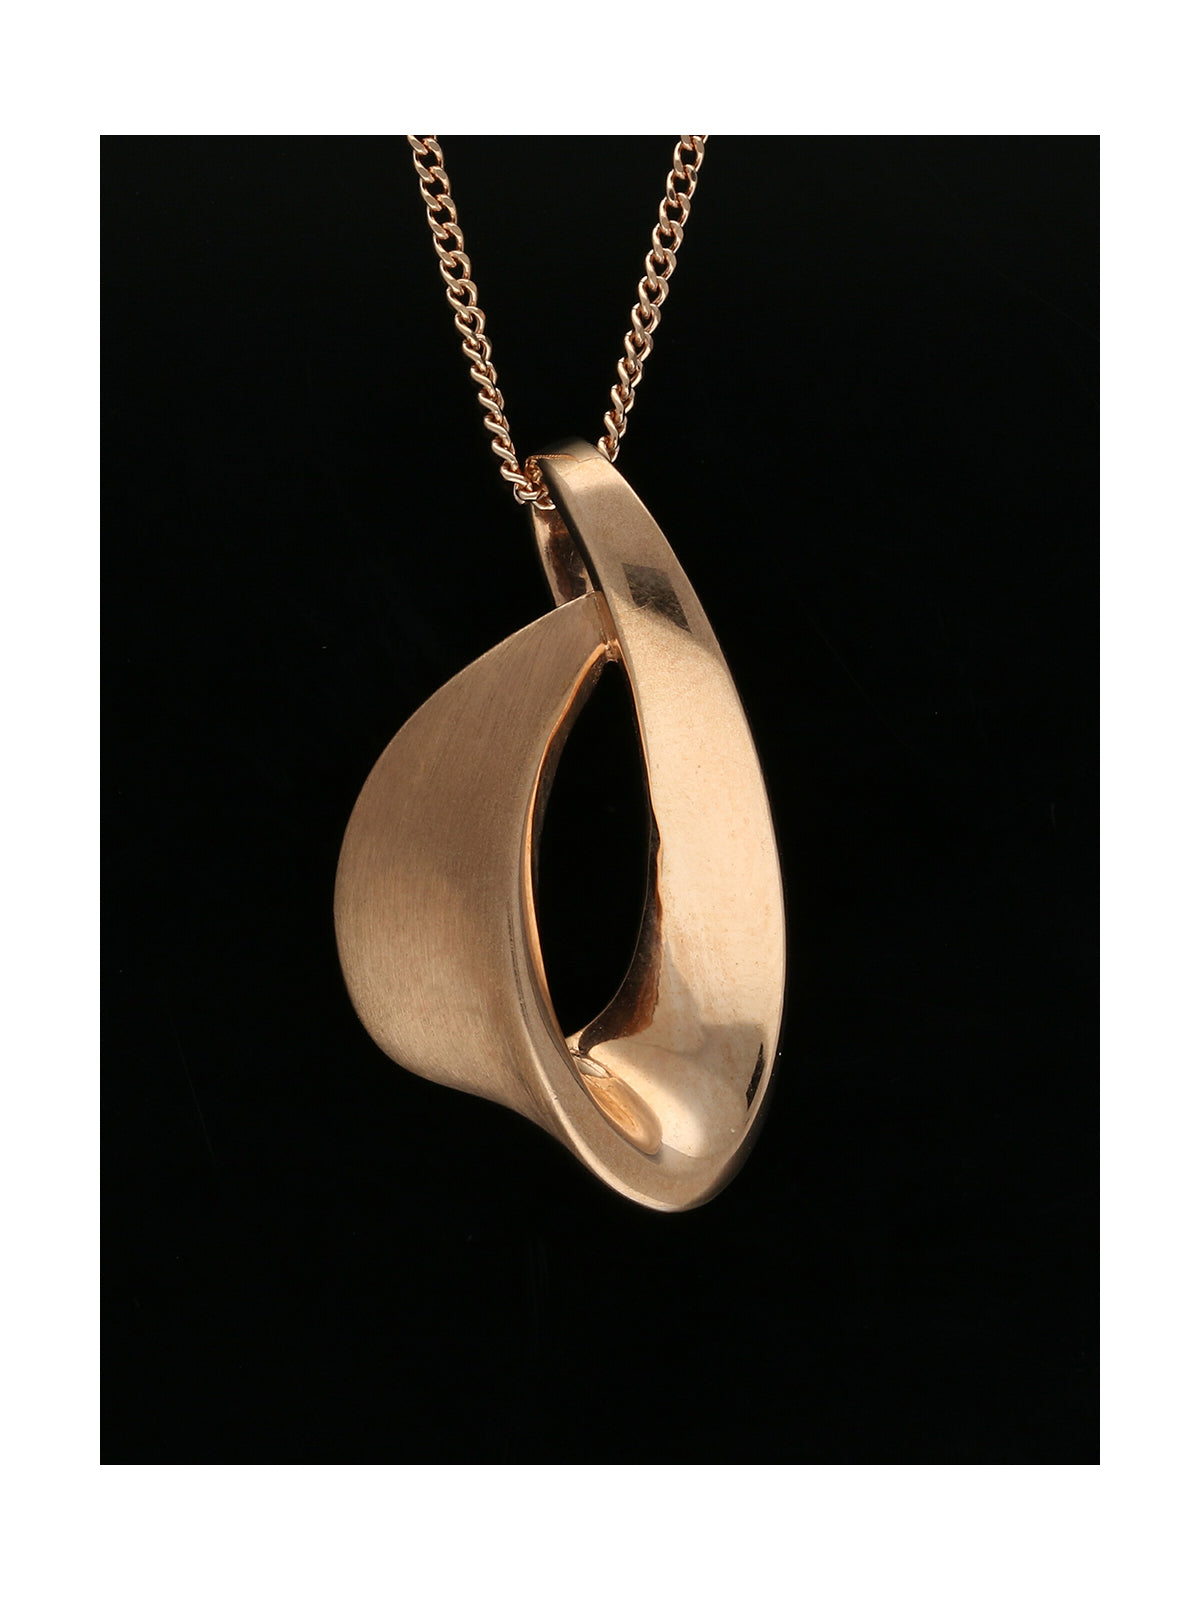 Fancy Ribbon Pendant Necklace in 9ct Rose Gold